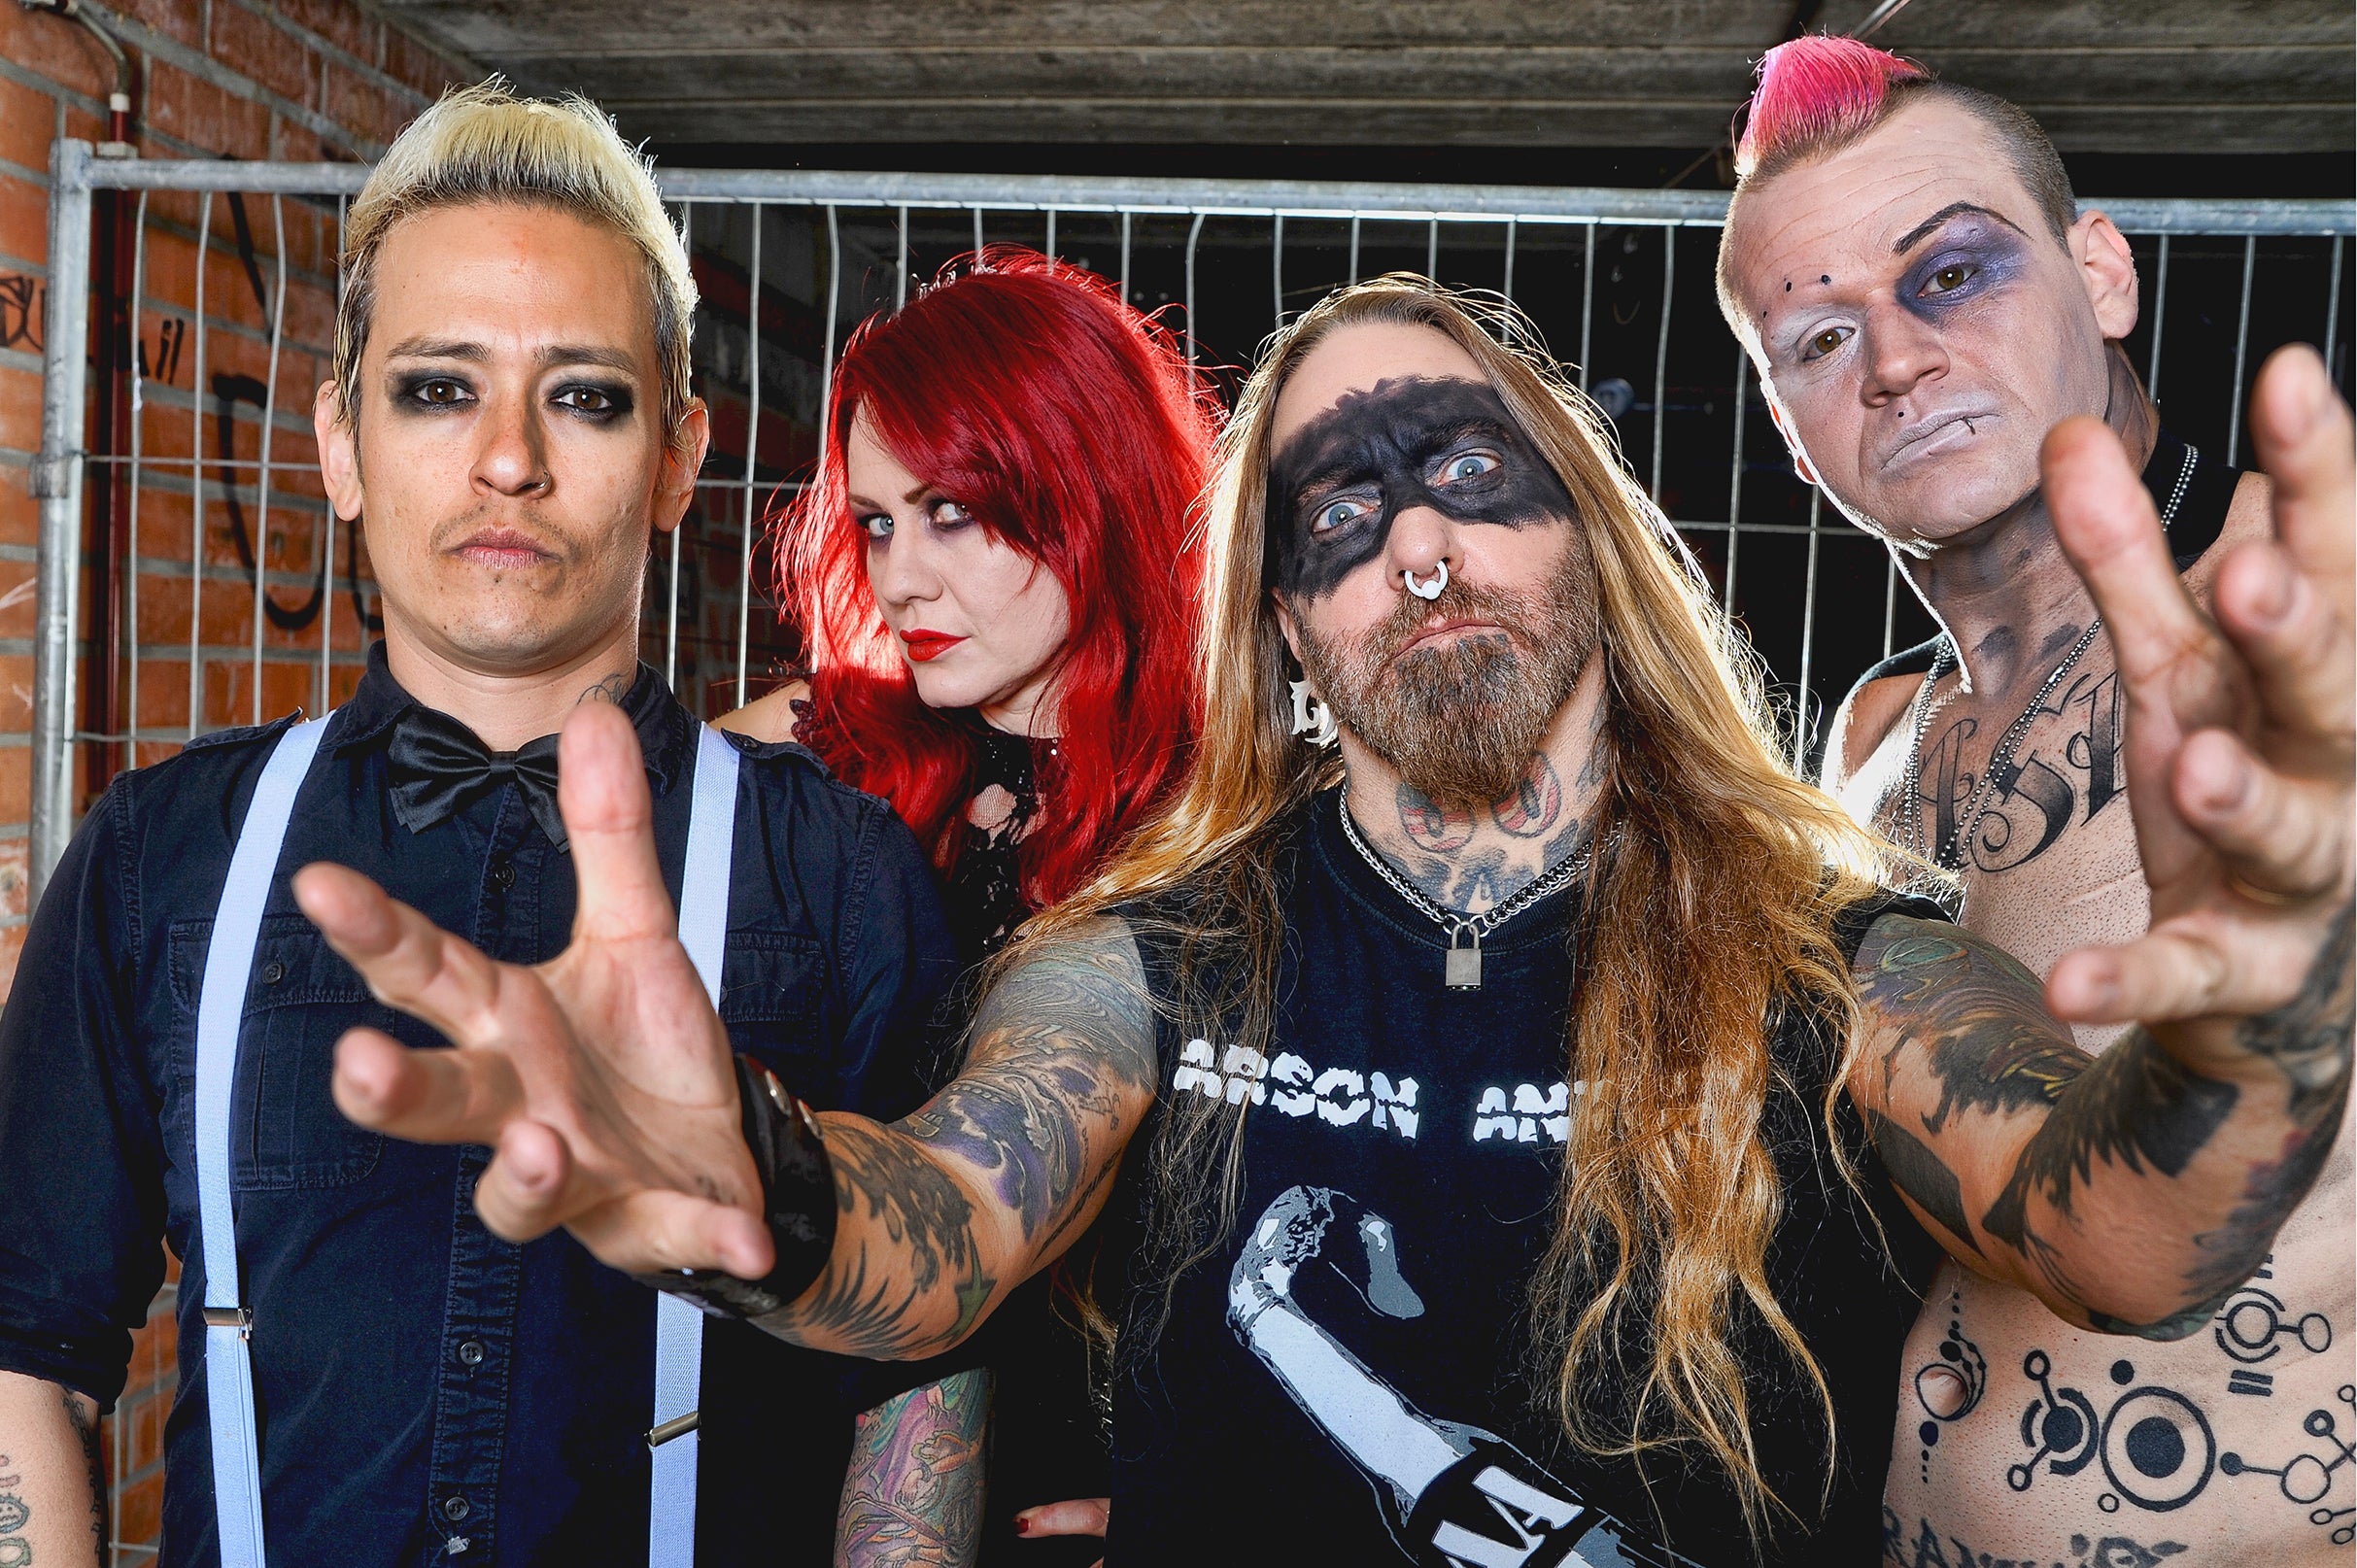 Coal Chamber with Fear Factory, Twiztid, Wednesday 13, Black Satellite presale password for event tickets in Dallas, TX (House of Blues Dallas )